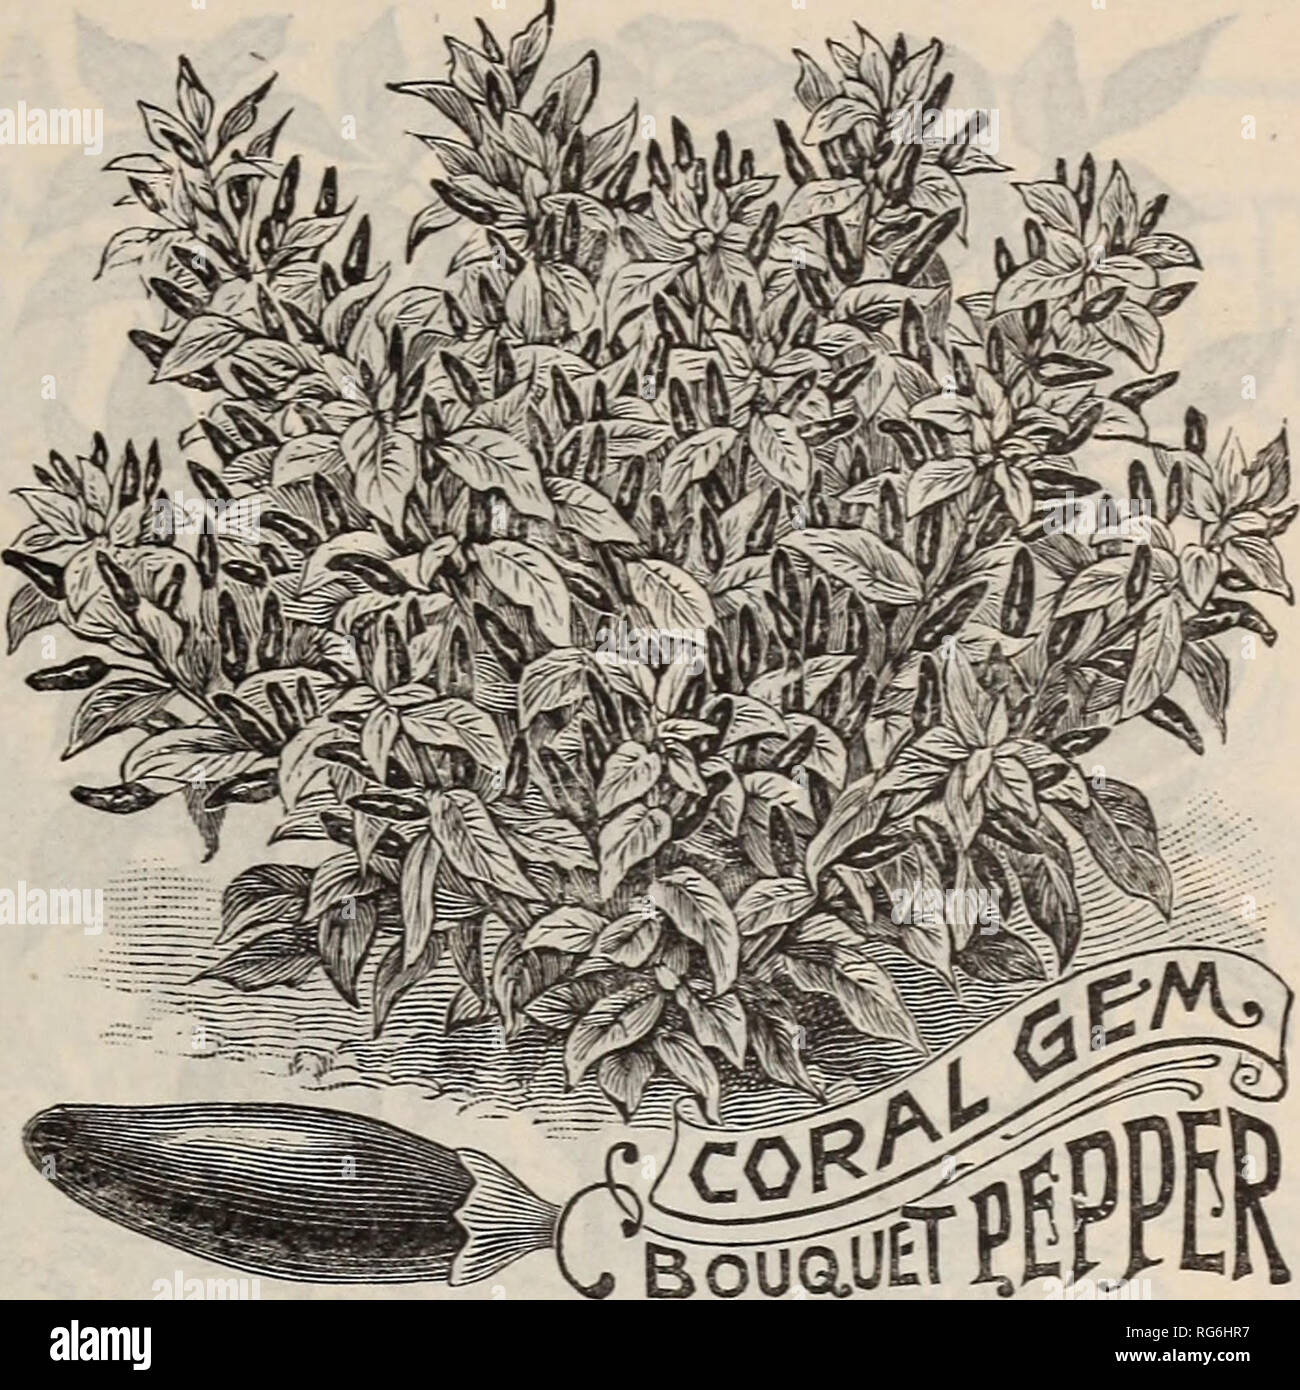 . Burpee's farm annual, 1892. Nursery stock Pennsylvania Philadelphia Catalogs; Flowers Catalogs; Vegetables Catalogs; Seeds Catalogs. GOLDEN DAWN. per sauce, ft) $2.50. Per pkt. 5 cts.; oz. 25 cts.; 34 ft) 75 cts.; per CORAL GEM BOUQUET. The illustration above fails to do justice to this beautiful little variety; it is impossible in an engraving to show how completely covered are the little plants with hundreds of the small bright-red Peppers. The single Pepper illustrated is of natural size and so thickly set on the dwarf plants as to give each plant the appearance of a &quot; Bouquet of Cor Stock Photo